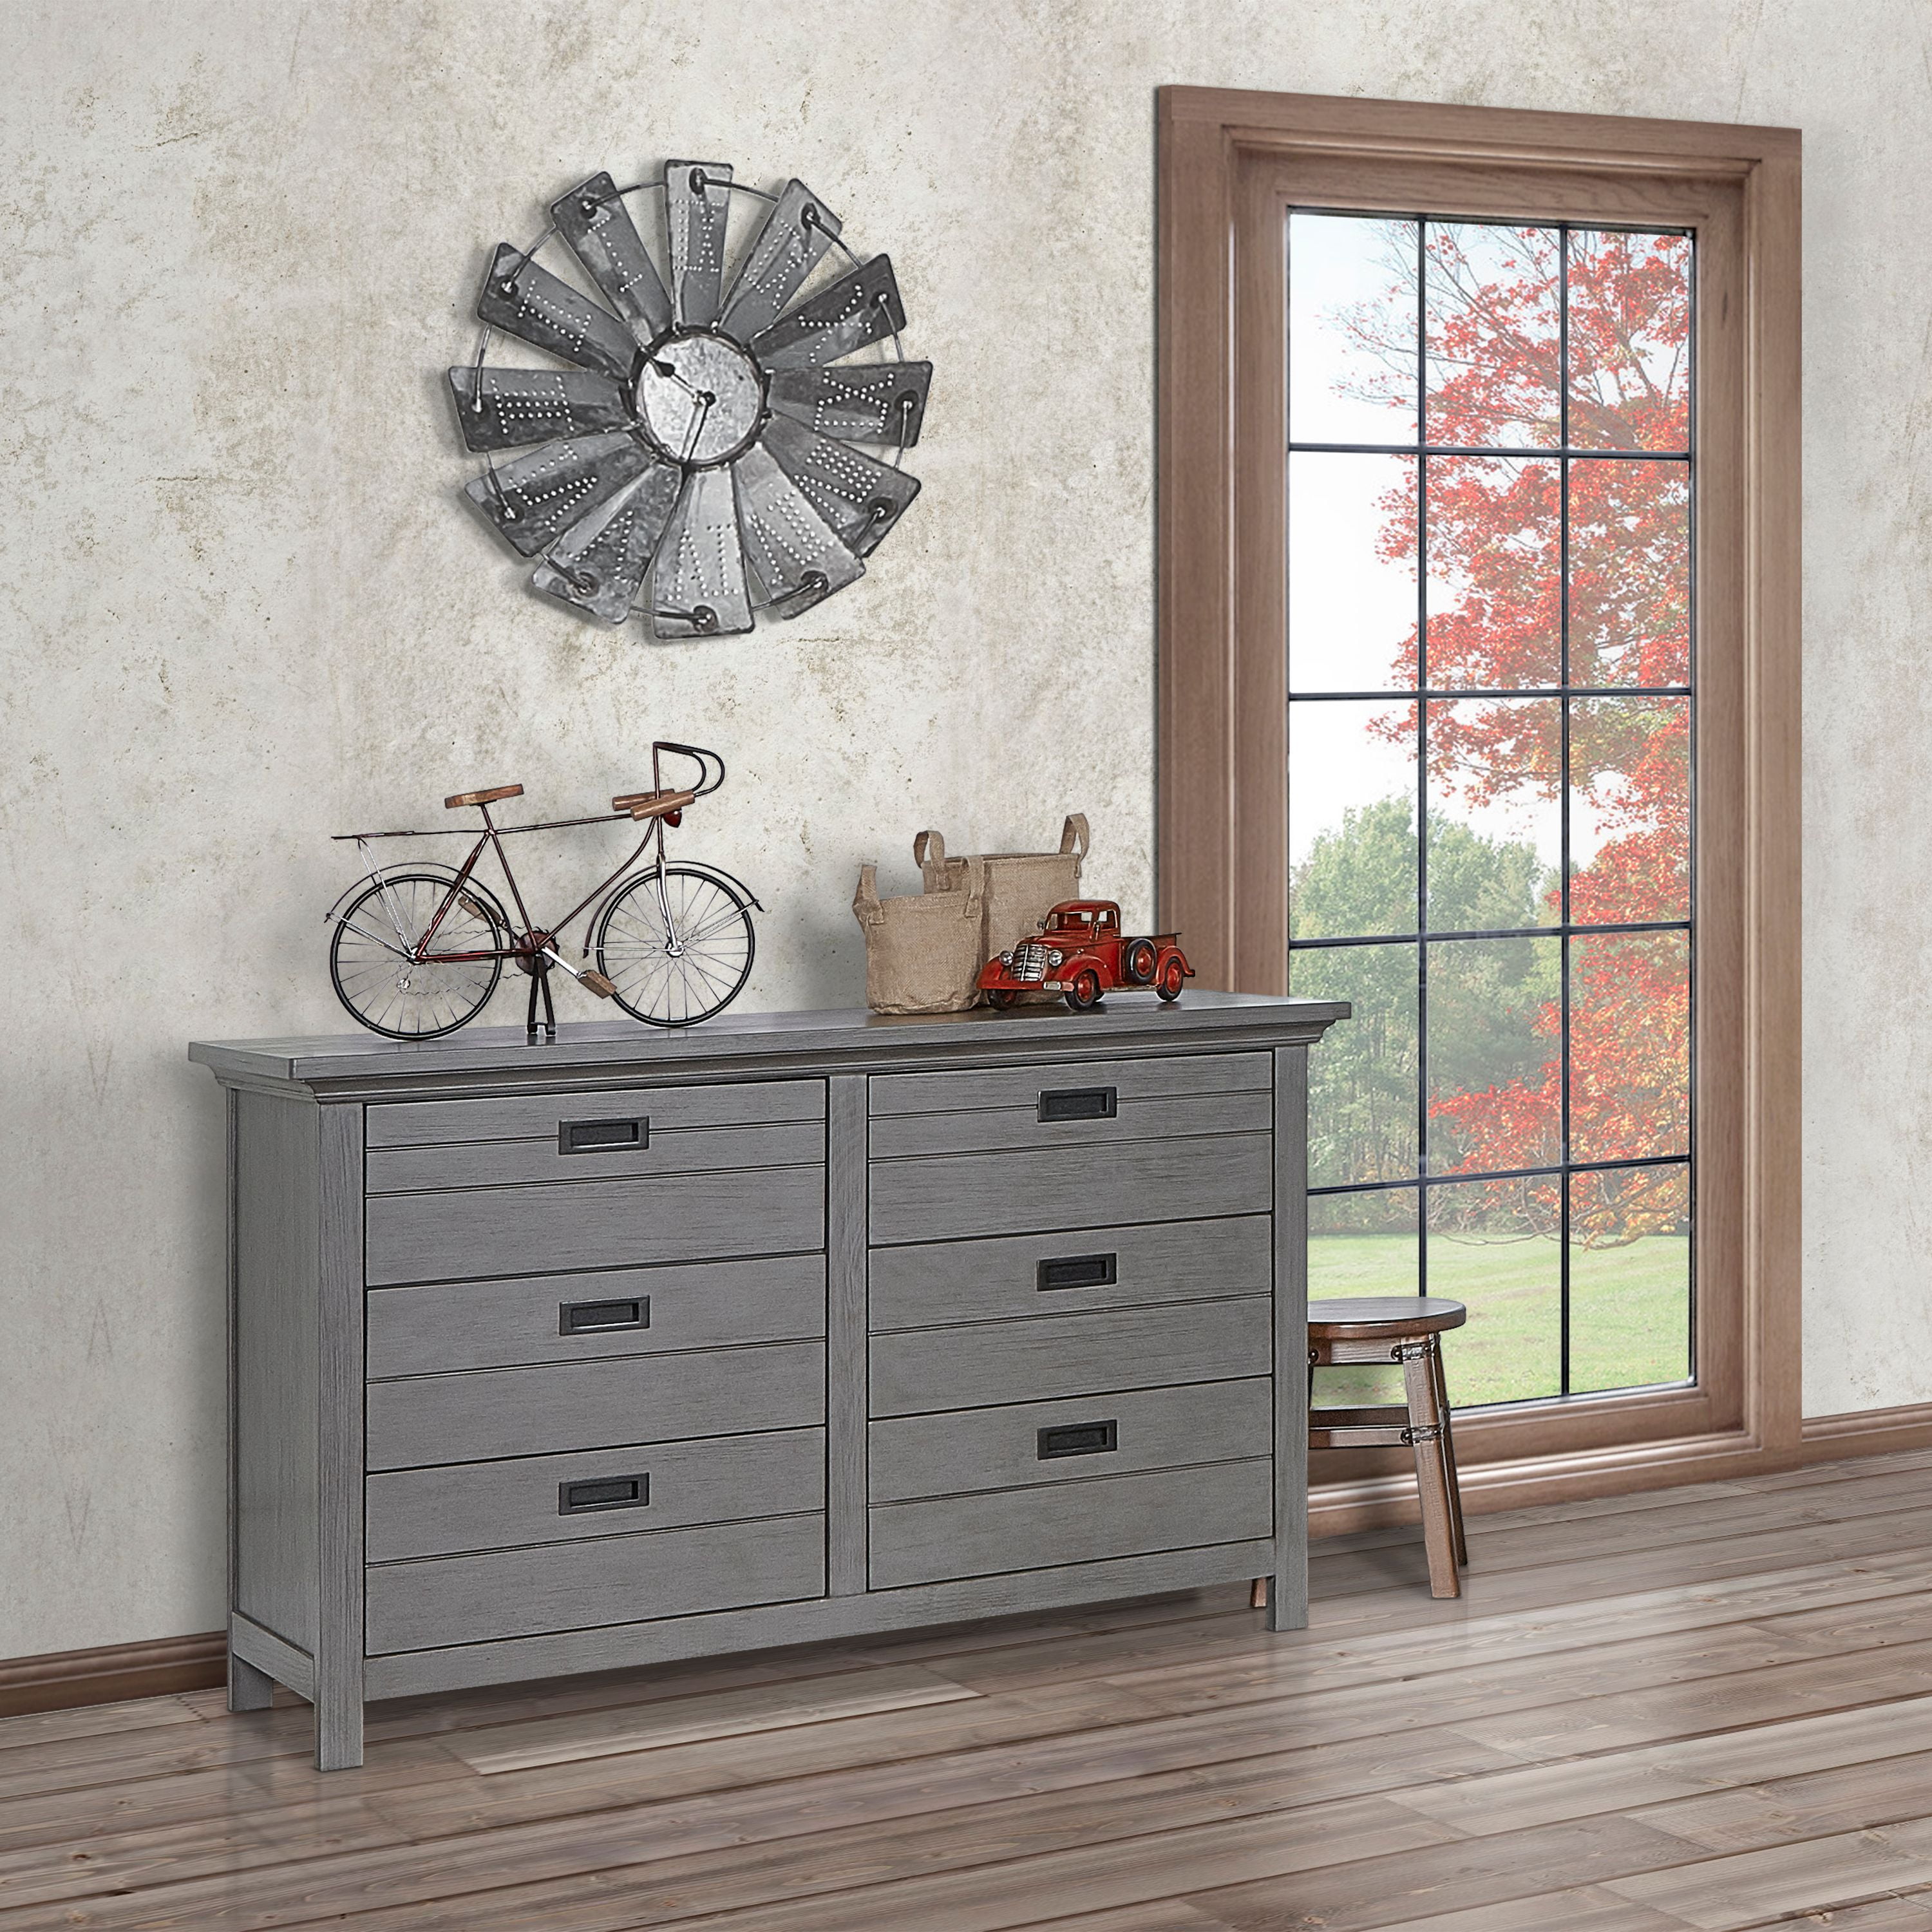 Pack of 1 54x20.25x33 Inch Evolur Waverly Double Dresser in Weathered White 